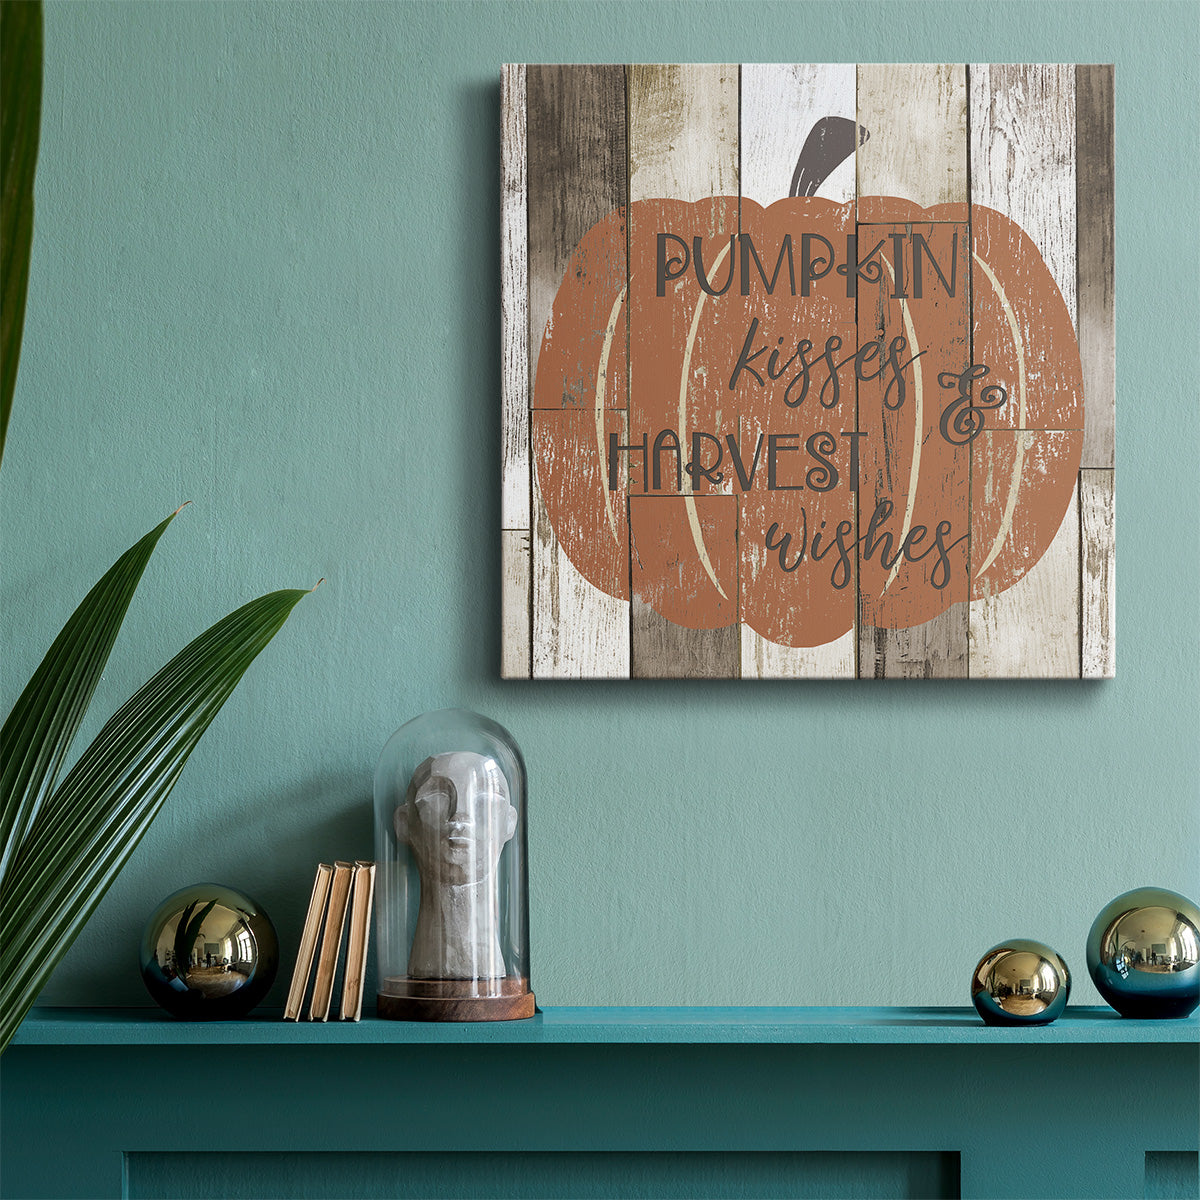 Pumpkin Kisses-Premium Gallery Wrapped Canvas - Ready to Hang